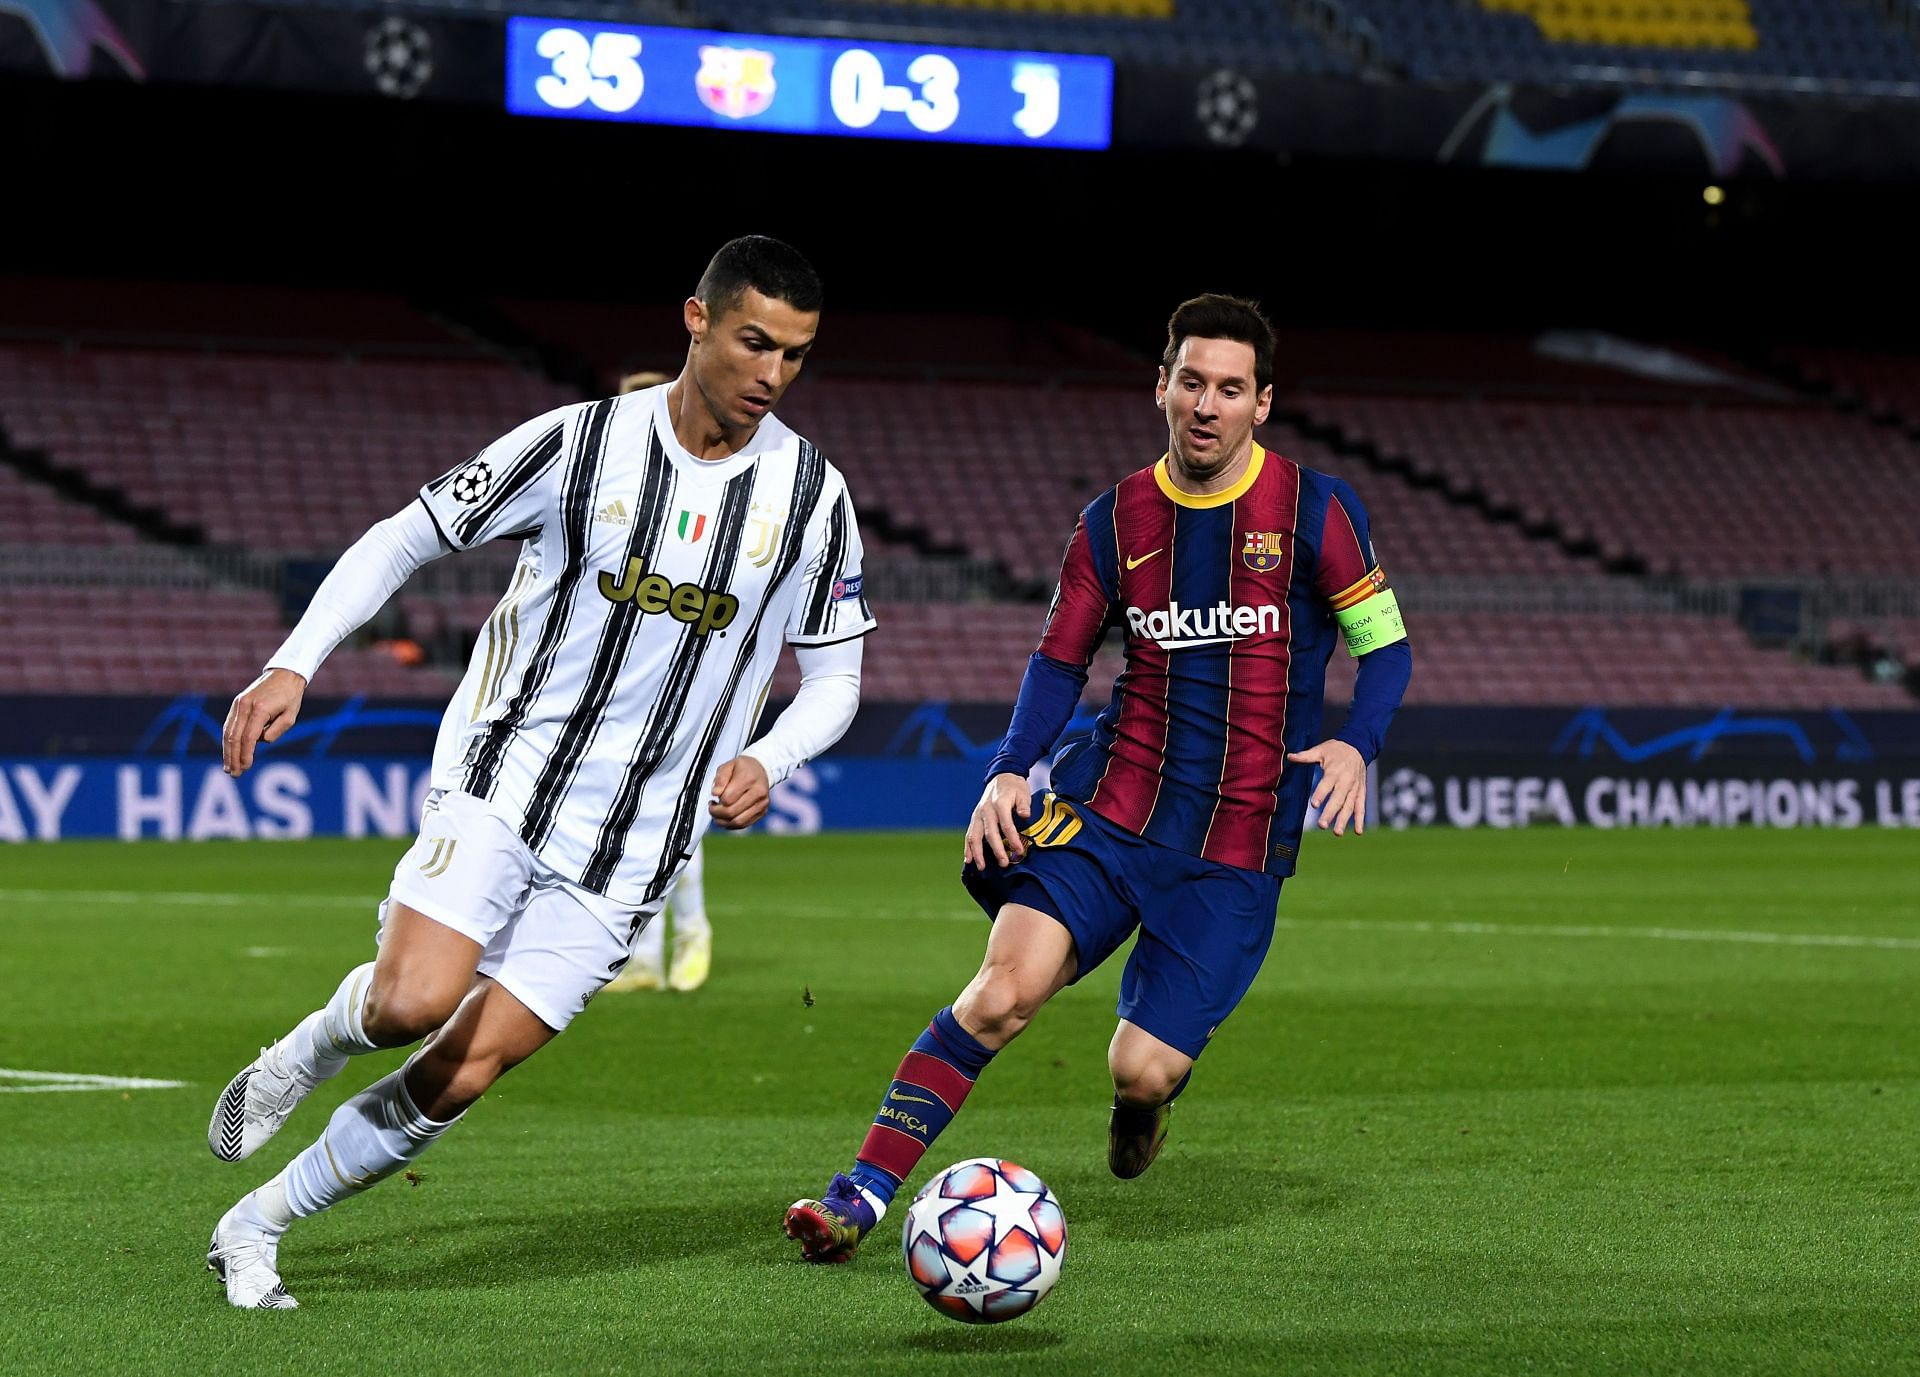 Lionel Messi and Cristiano Ronaldo facing each other in the Champions League last season.